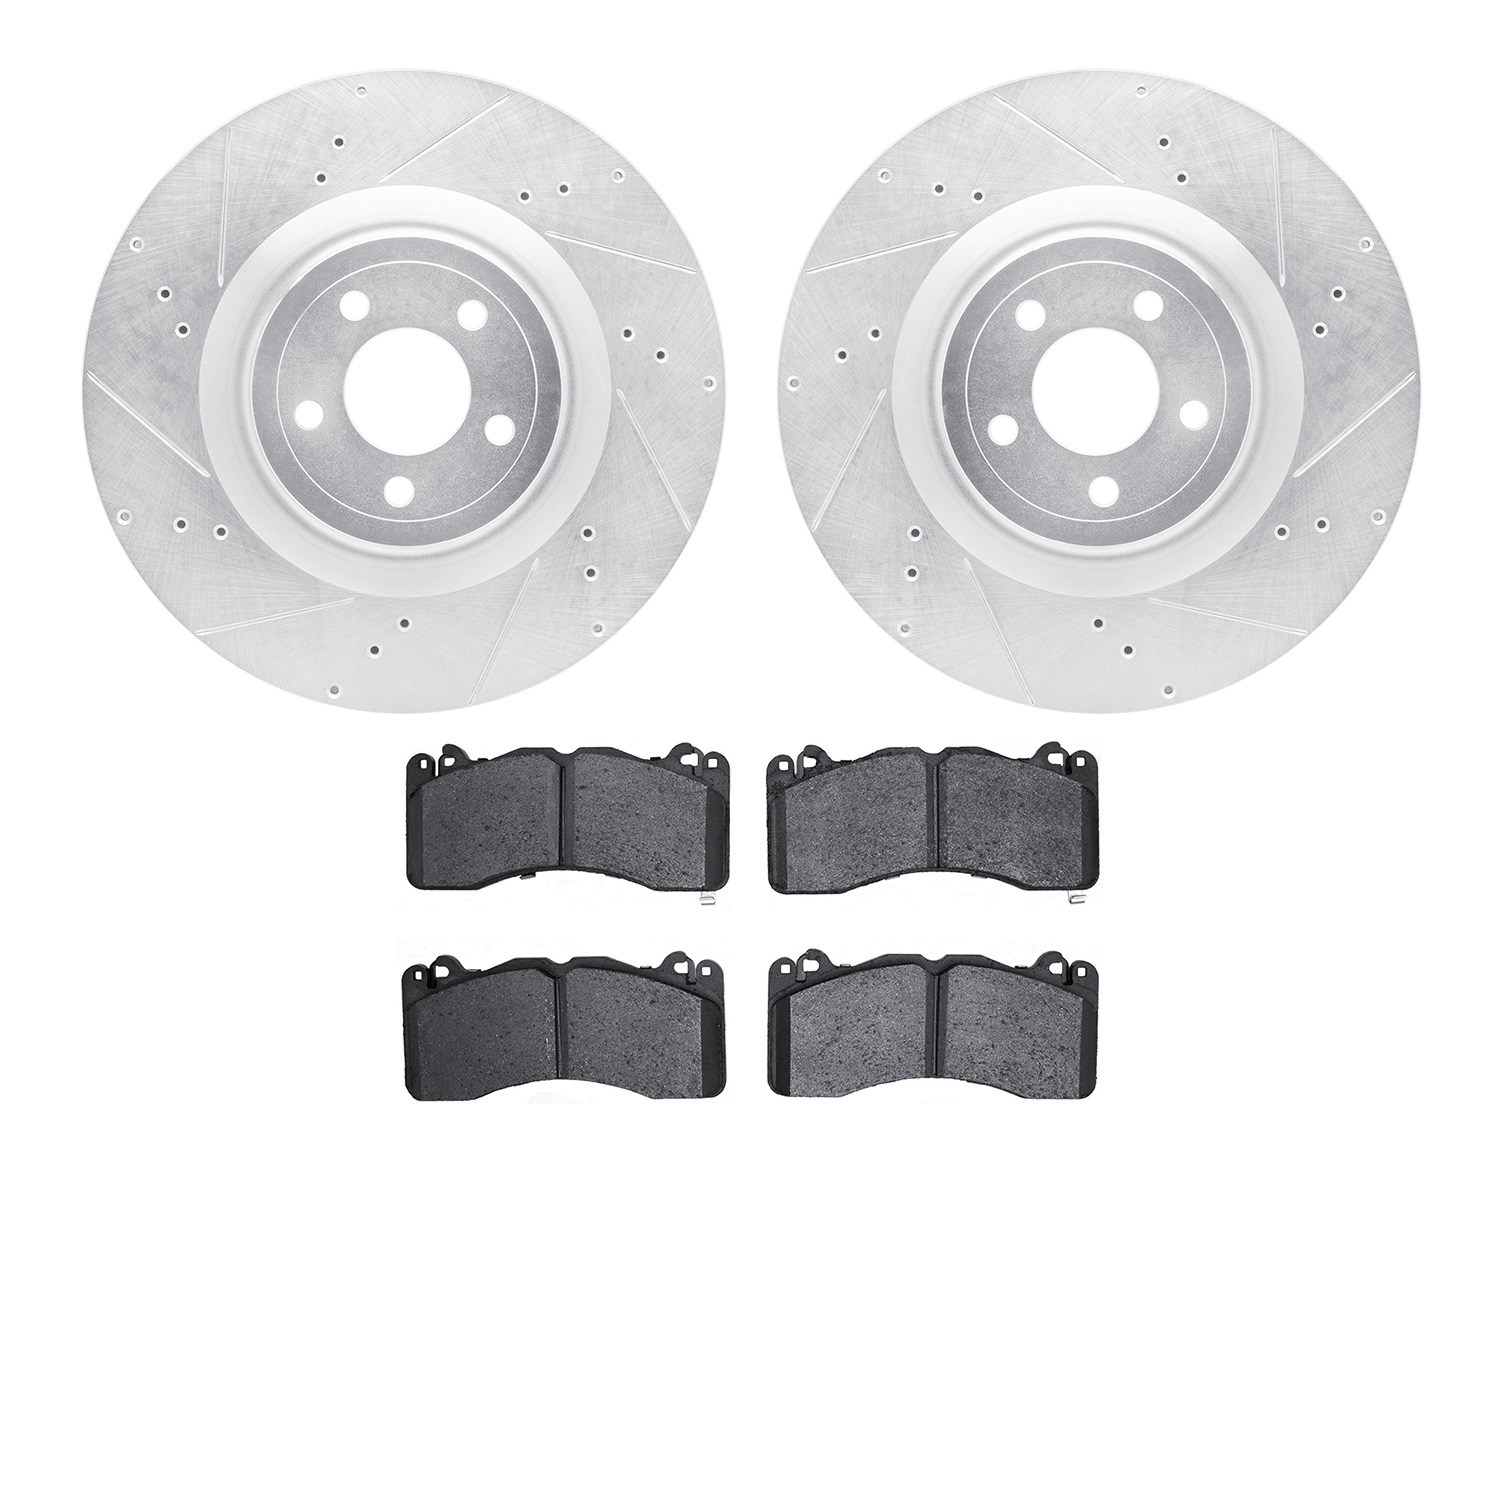 7502-54064 Drilled/Slotted Brake Rotors w/5000 Advanced Brake Pads Kit [Silver], Fits Select Ford/Lincoln/Mercury/Mazda, Positio